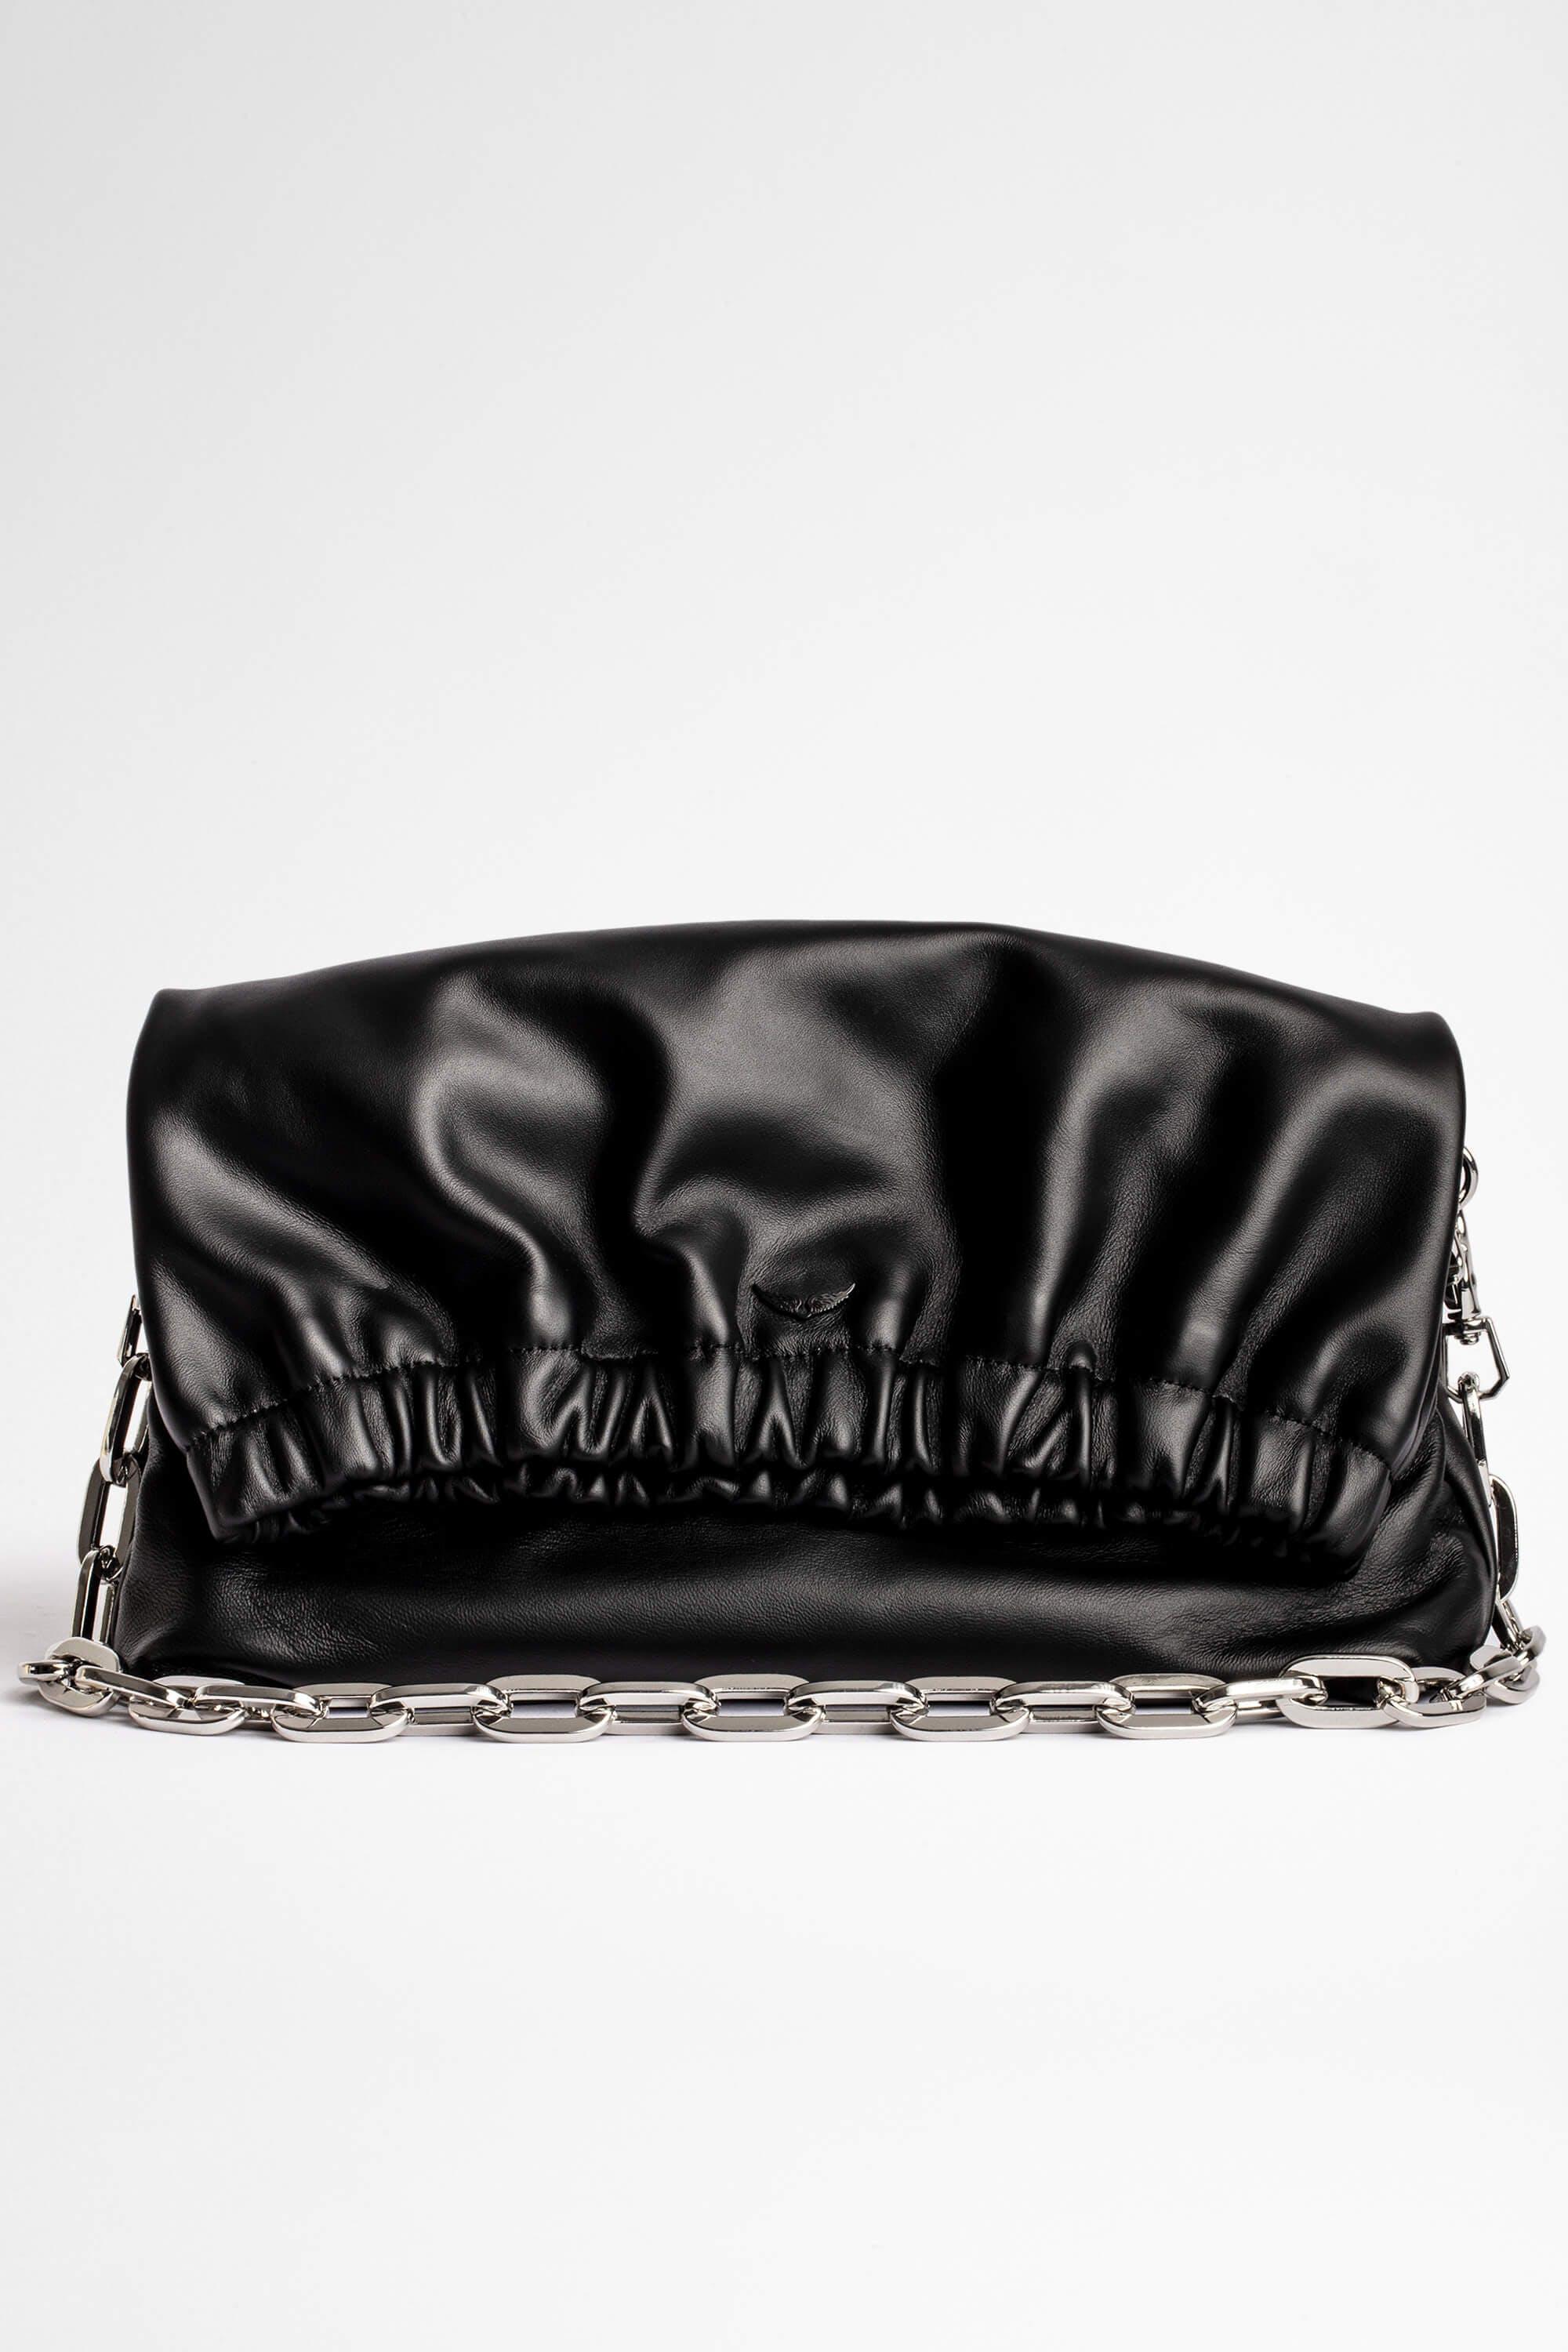 Zadig & Voltaire Rockyssime Bag in Black | Lyst